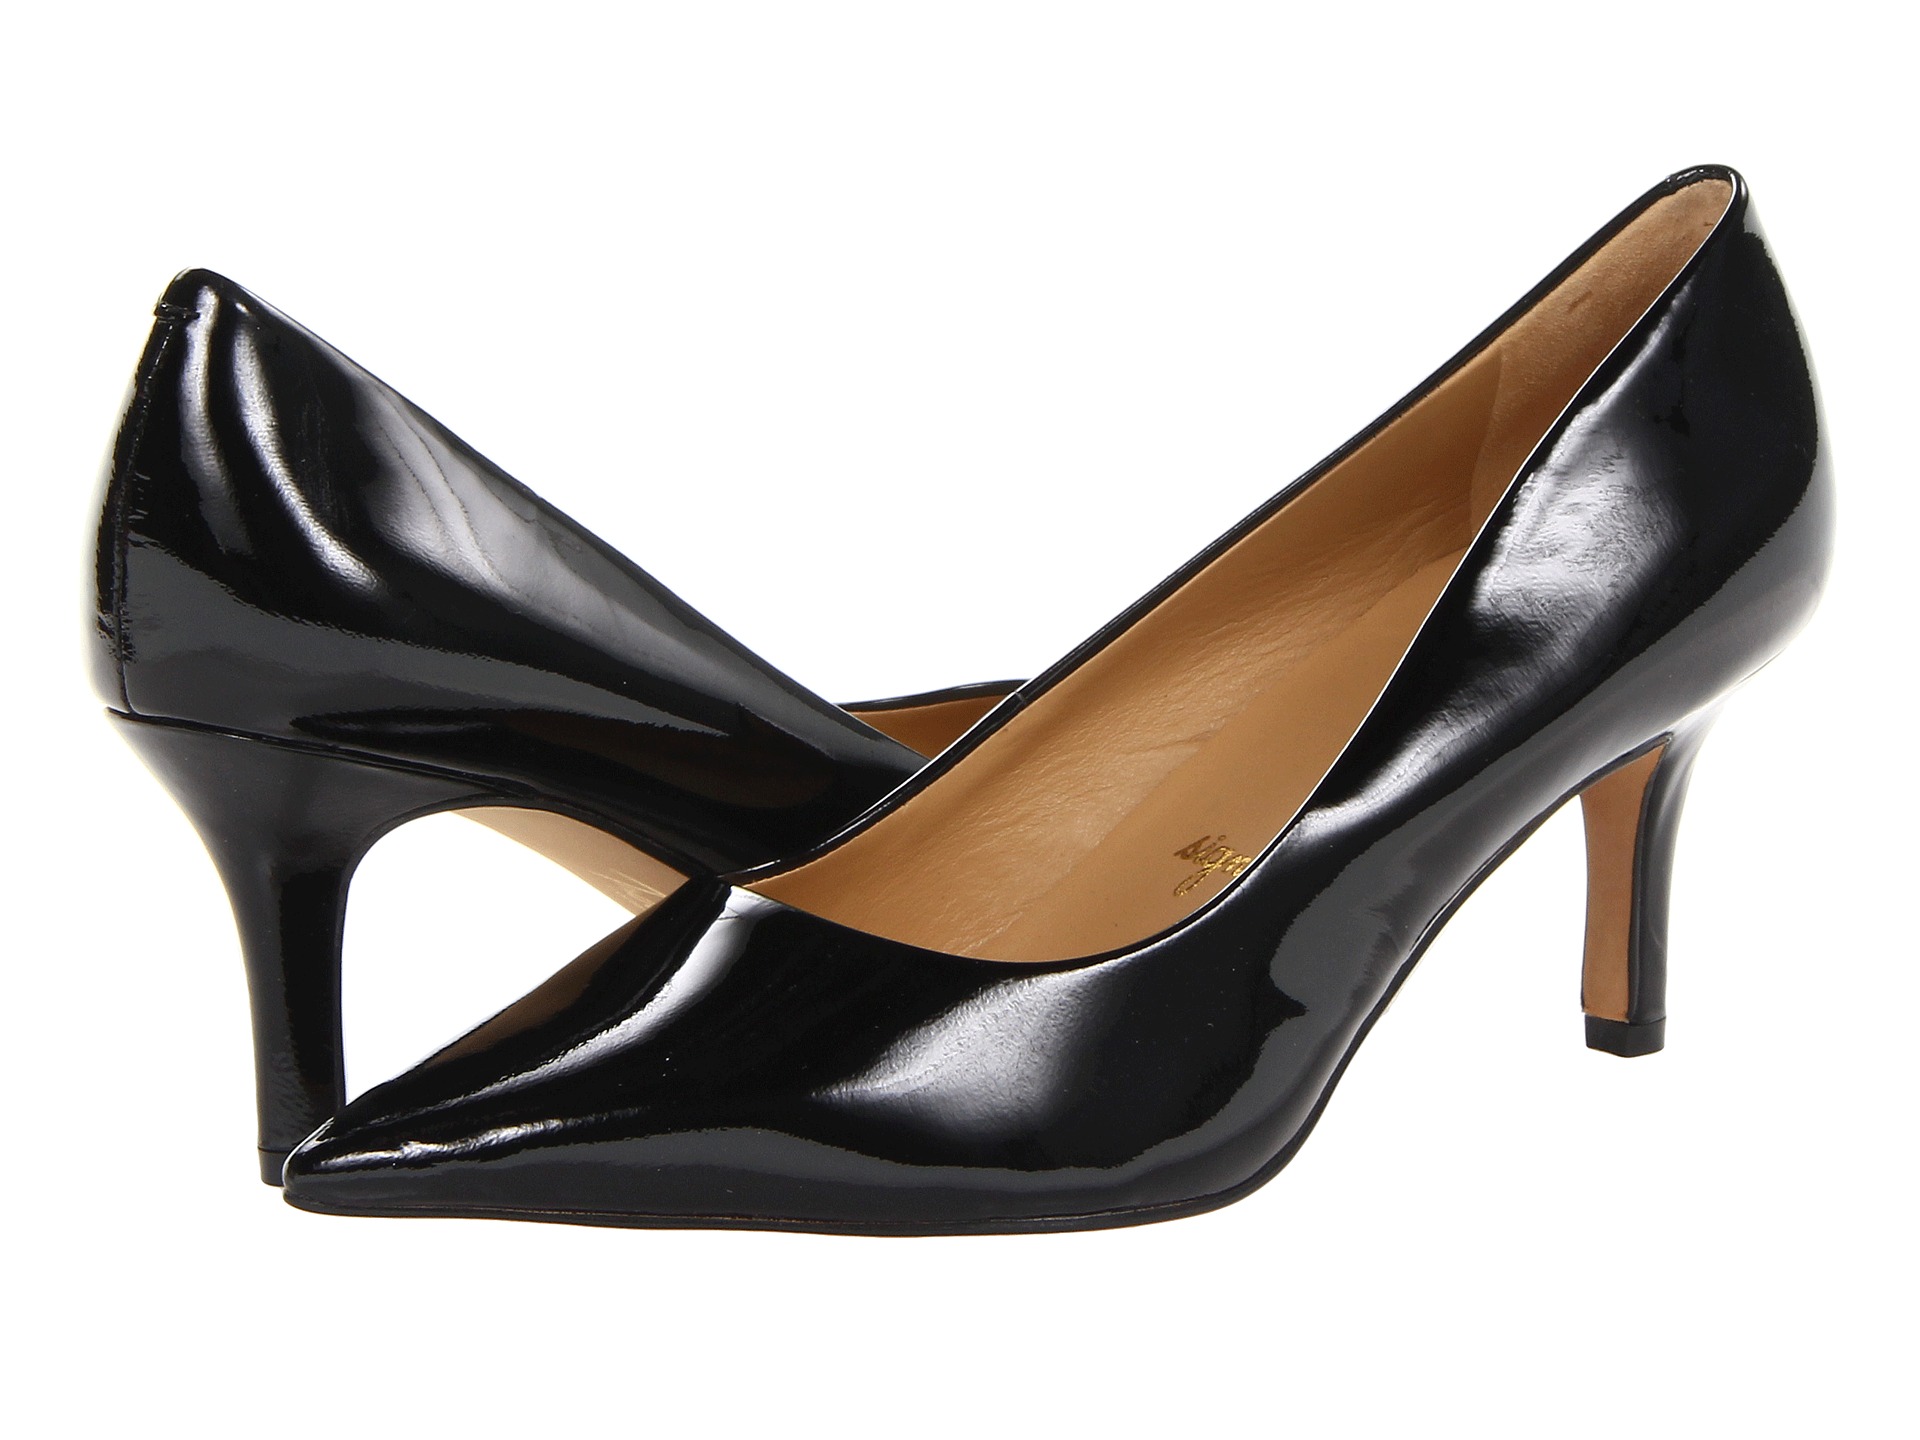 Trotters Alexa Black Patent Leather - Zappos.com Free Shipping BOTH Ways